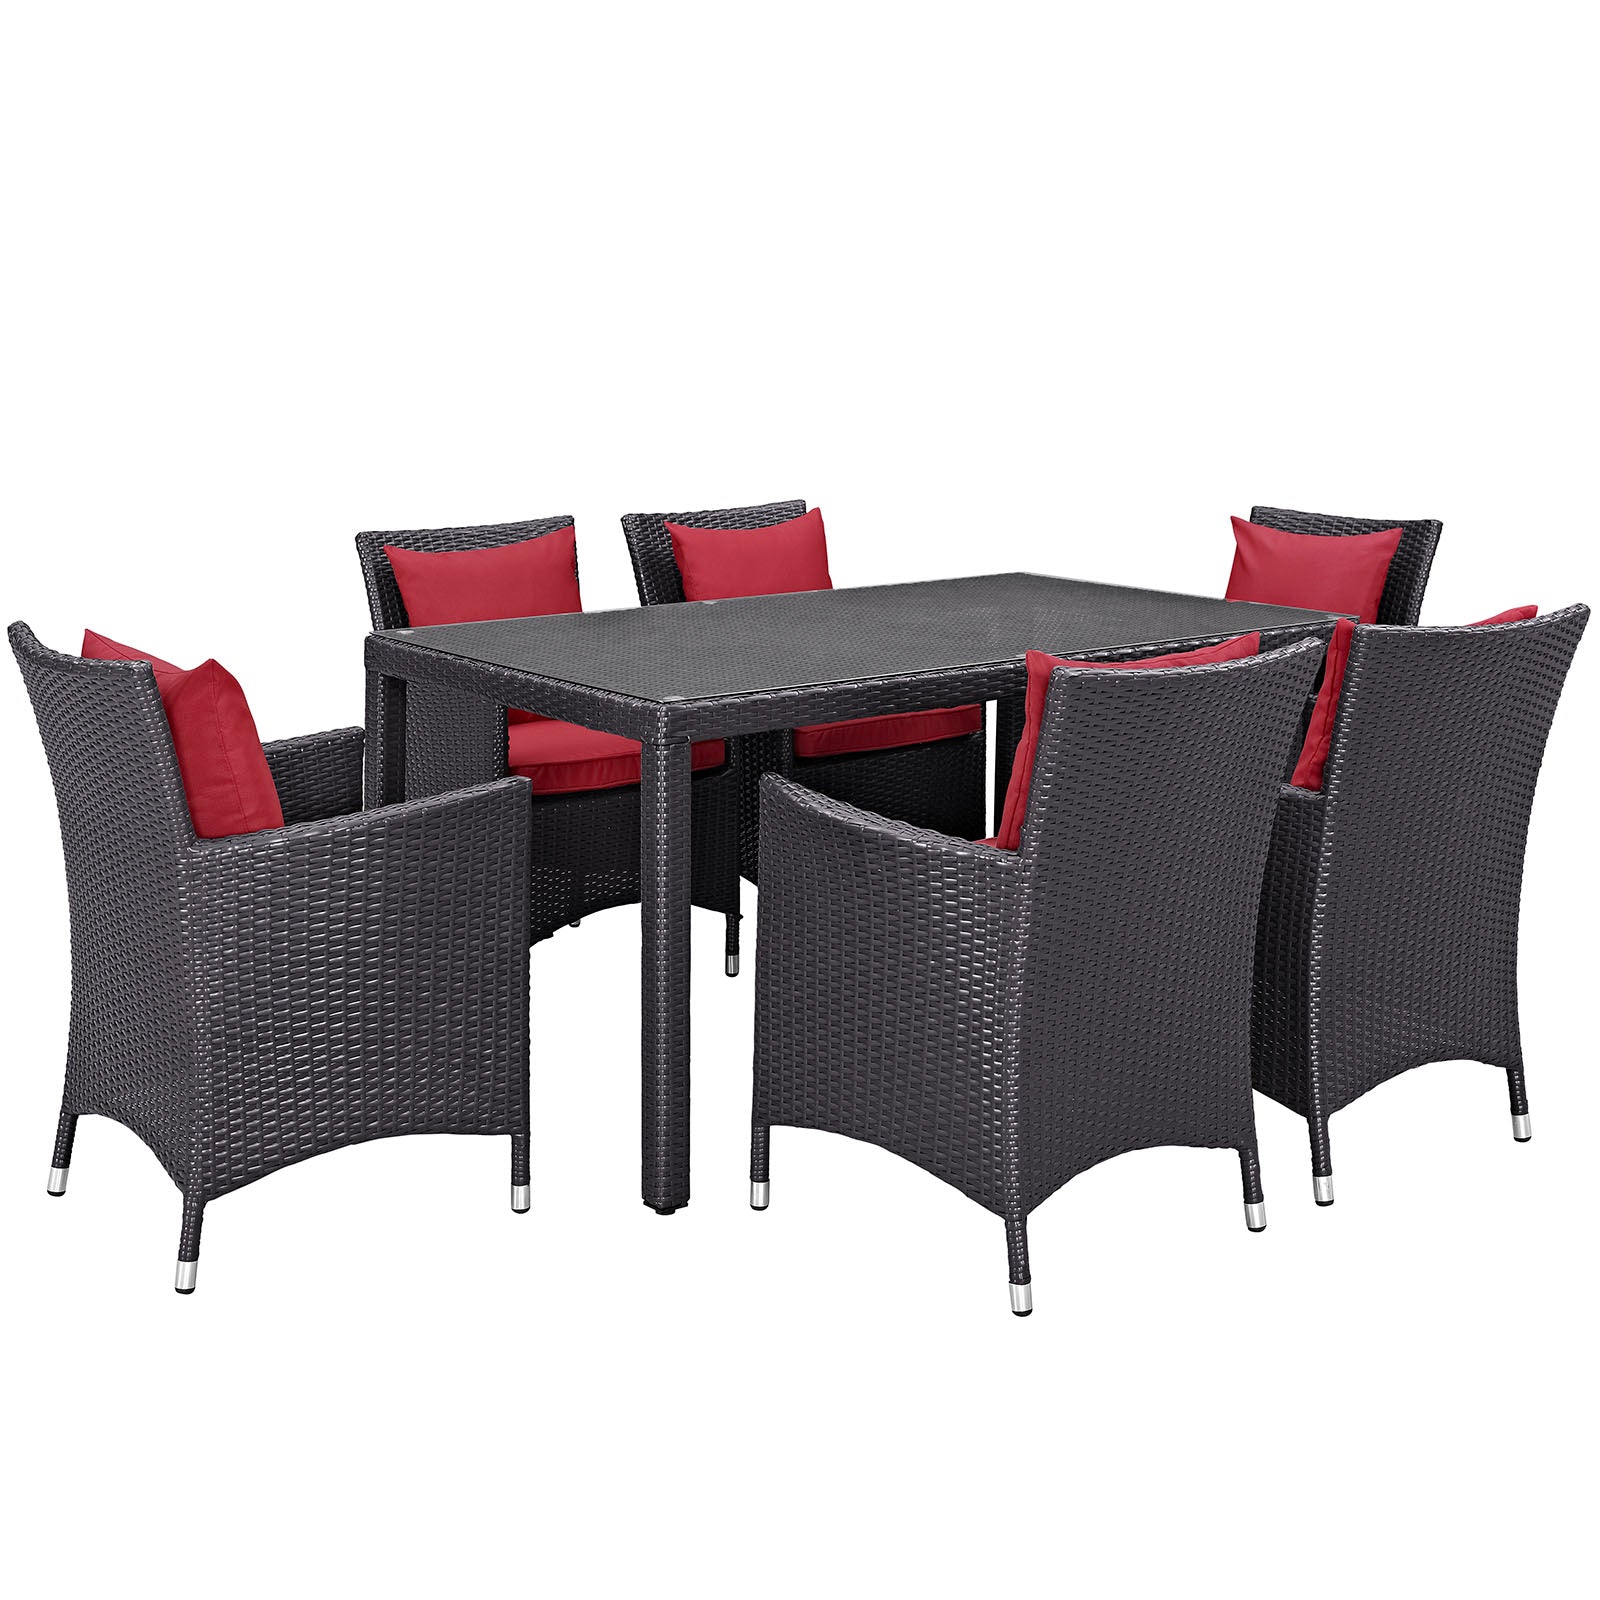 Modway Outdoor Dining Sets - Convene 7 Piece Outdoor Patio Dining Set Espresso Red 110"